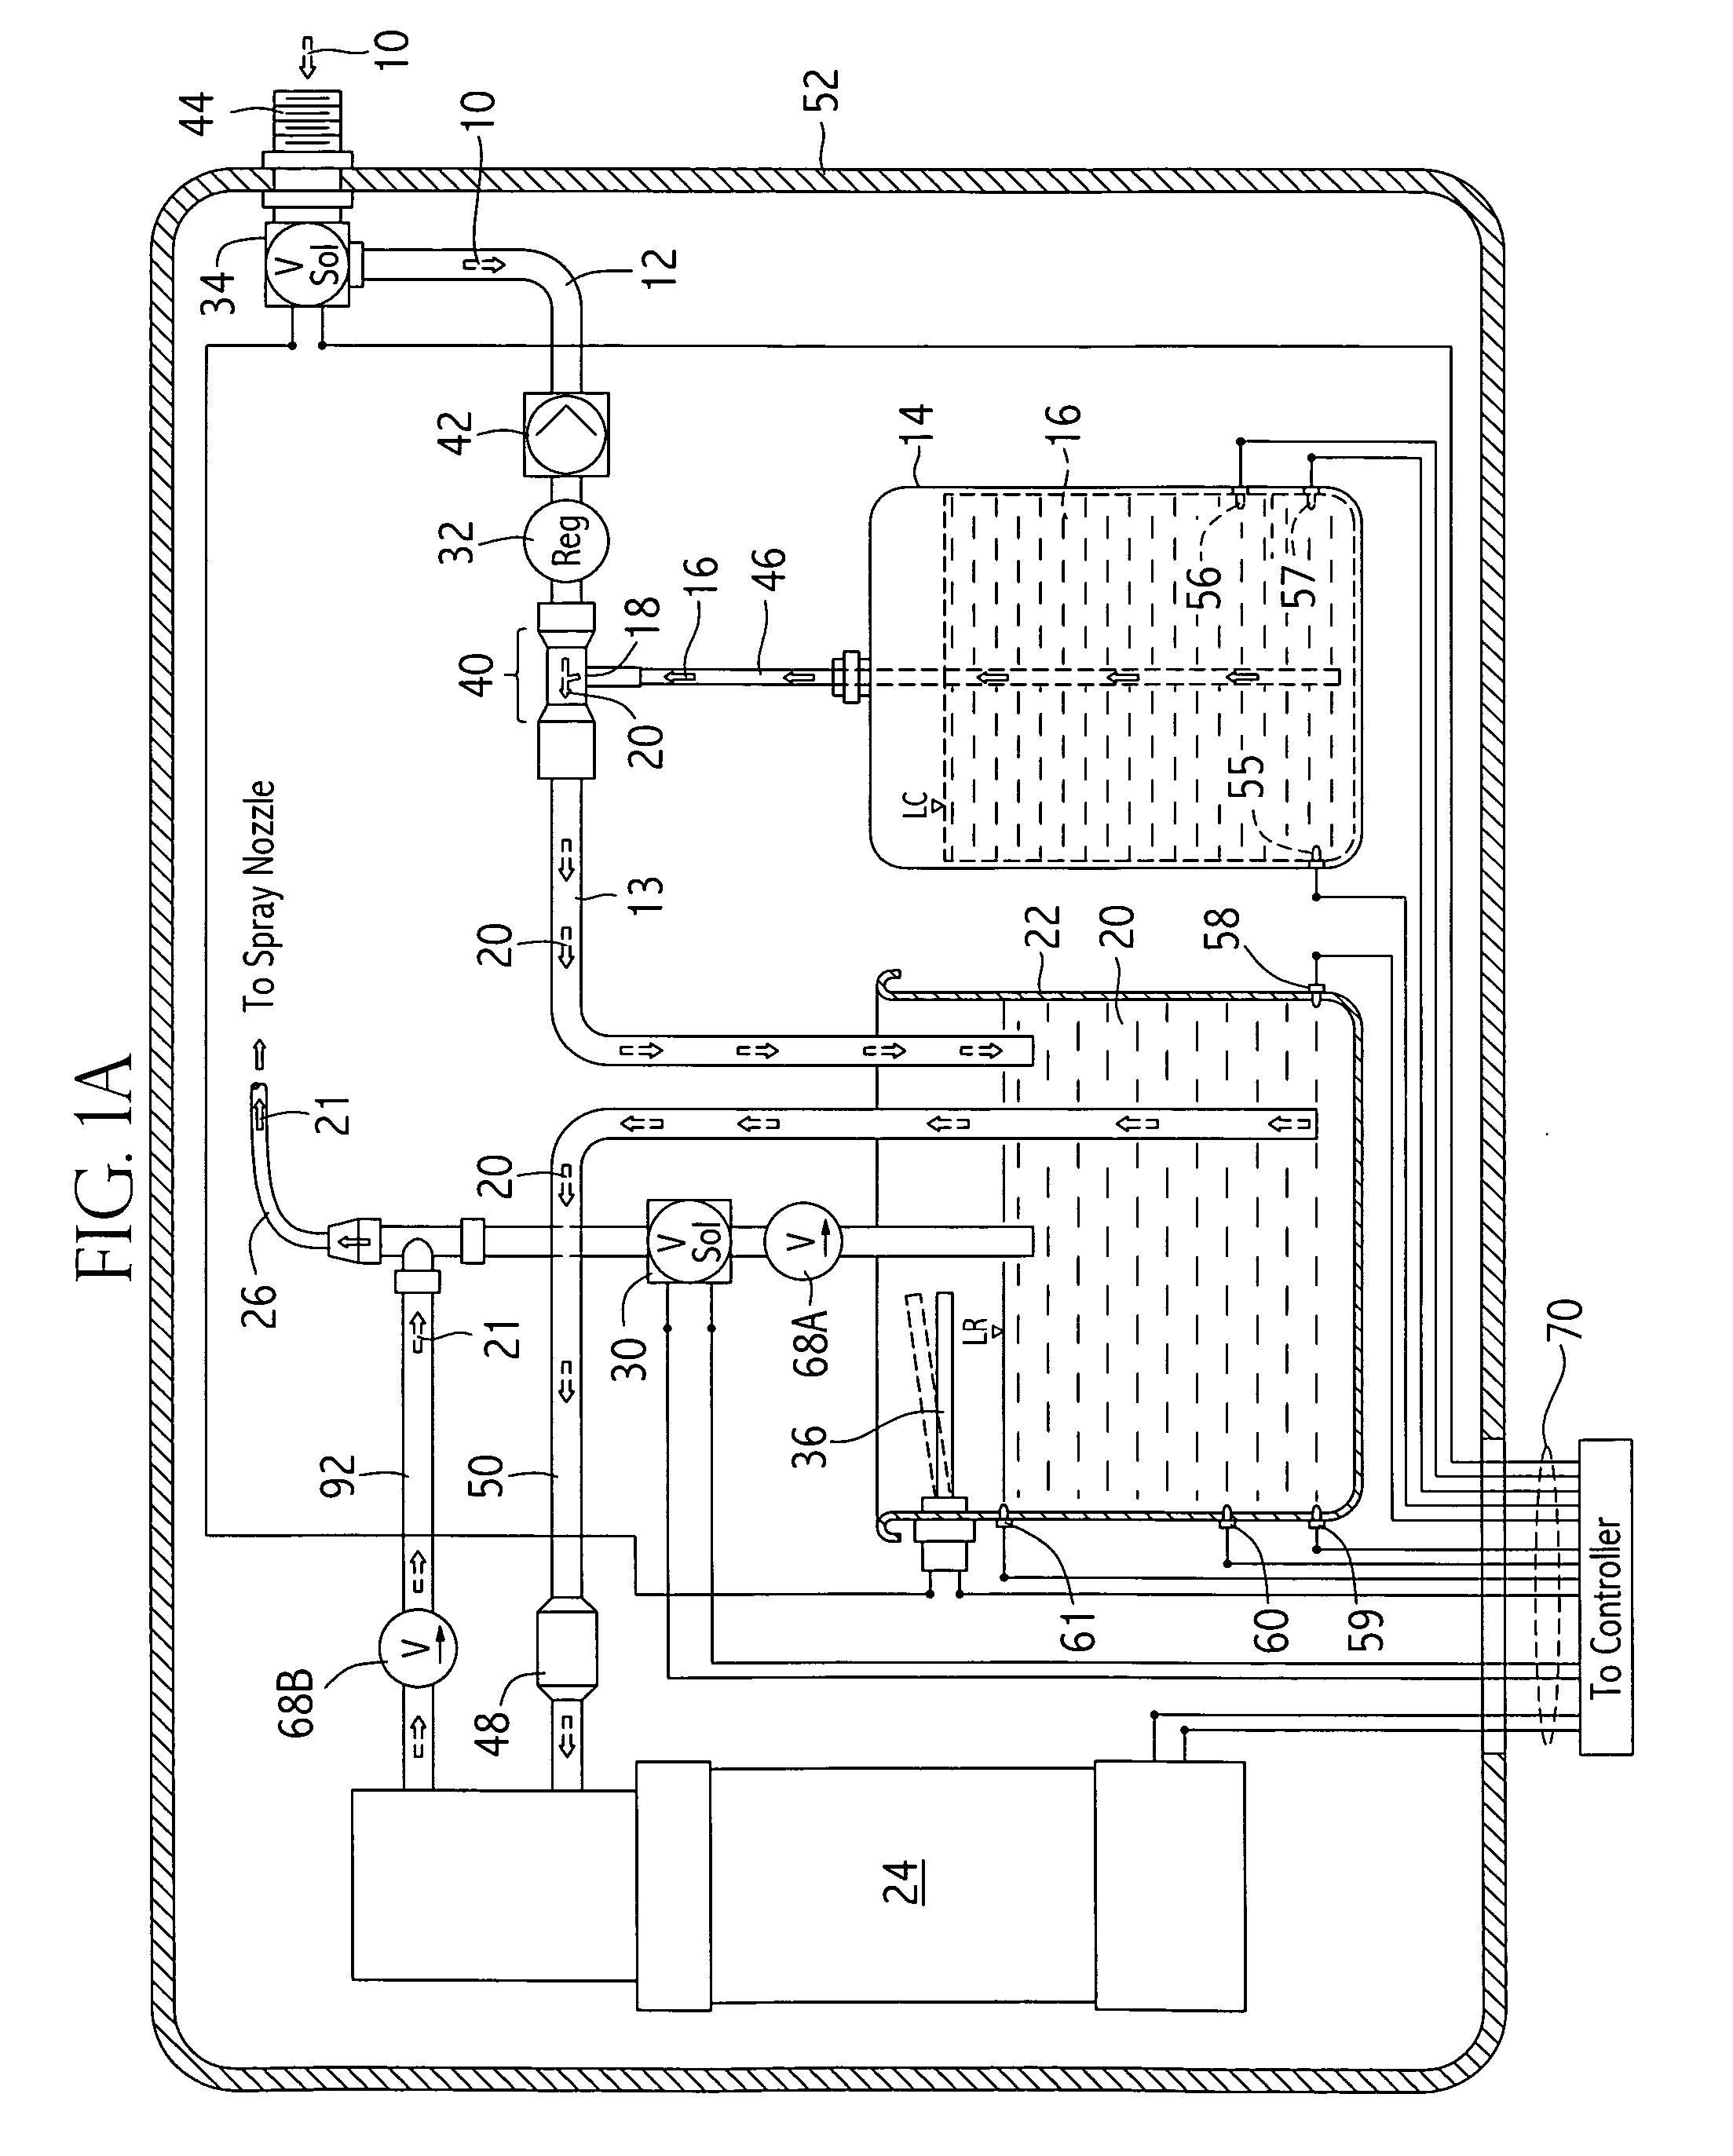 Systems and methods for dispensing liquids